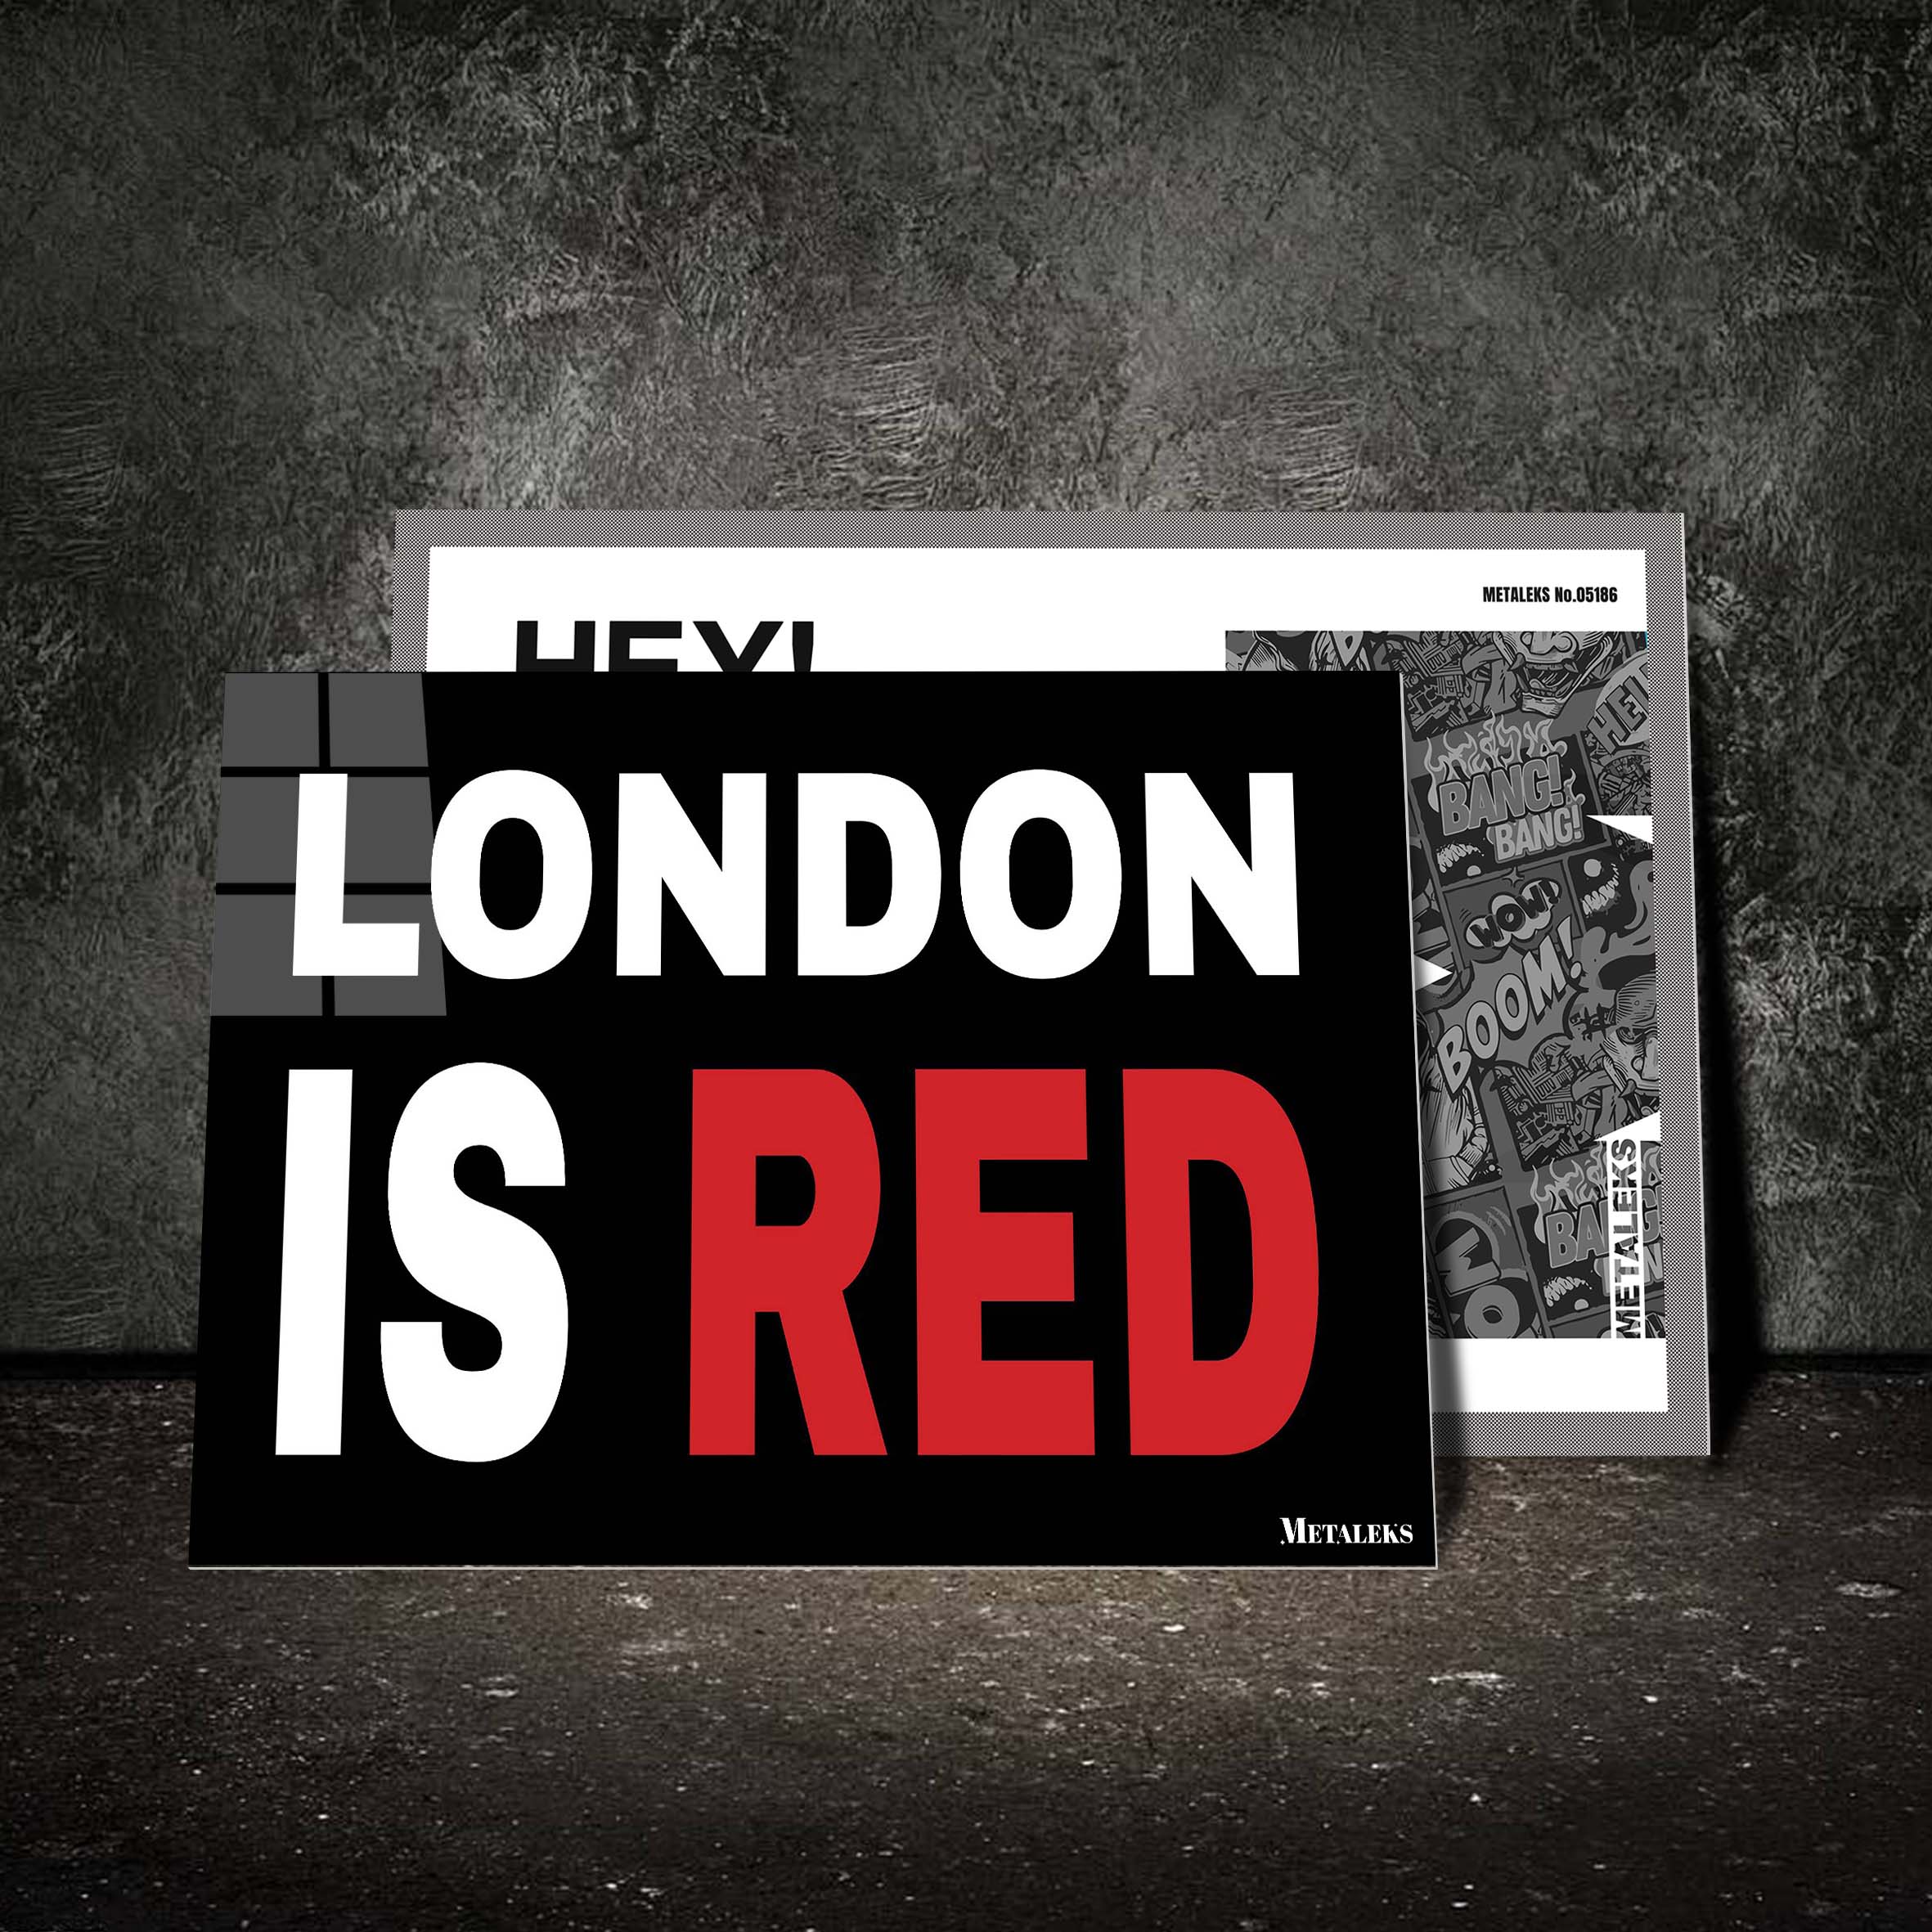 Funny London Is Red-designed by @Wijaki Thaisusuken